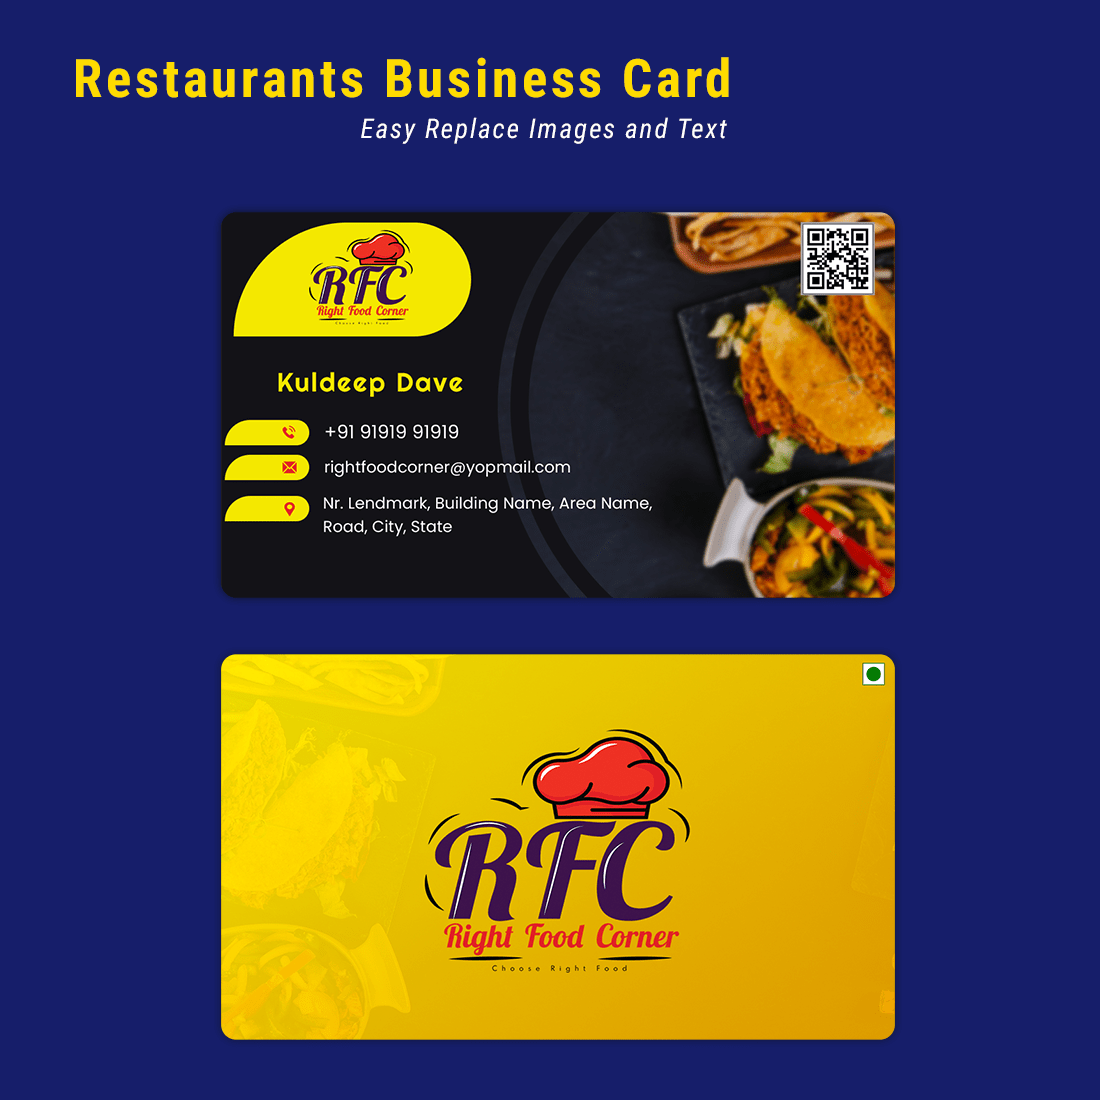 Business Card Restaurant With Bar-code cover image.